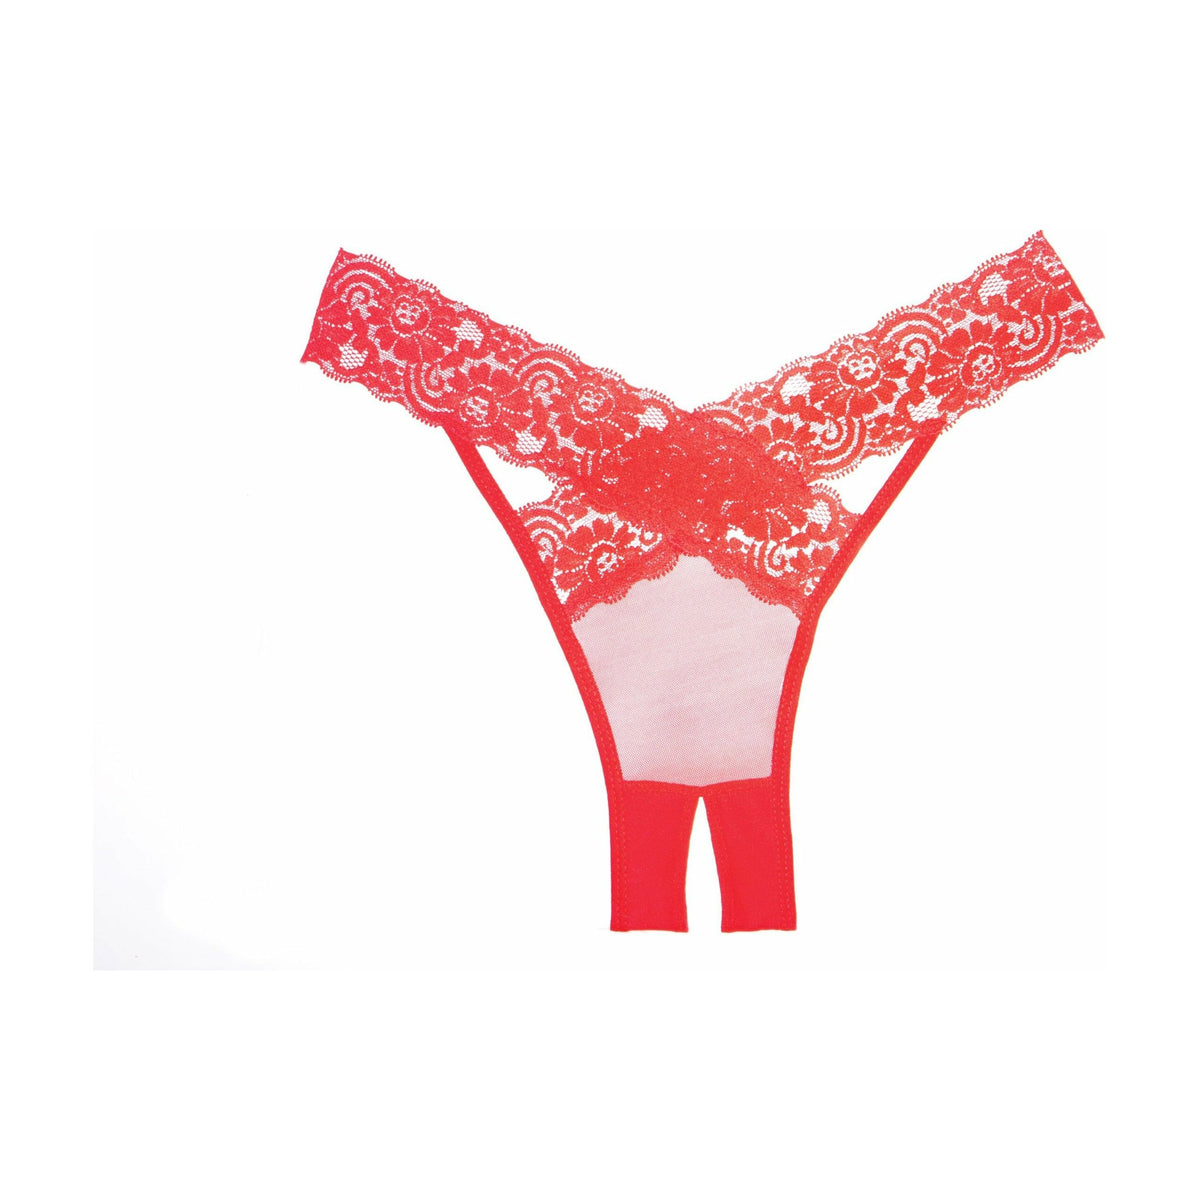 Allure Adore – Desiré Panty – One Size-Red